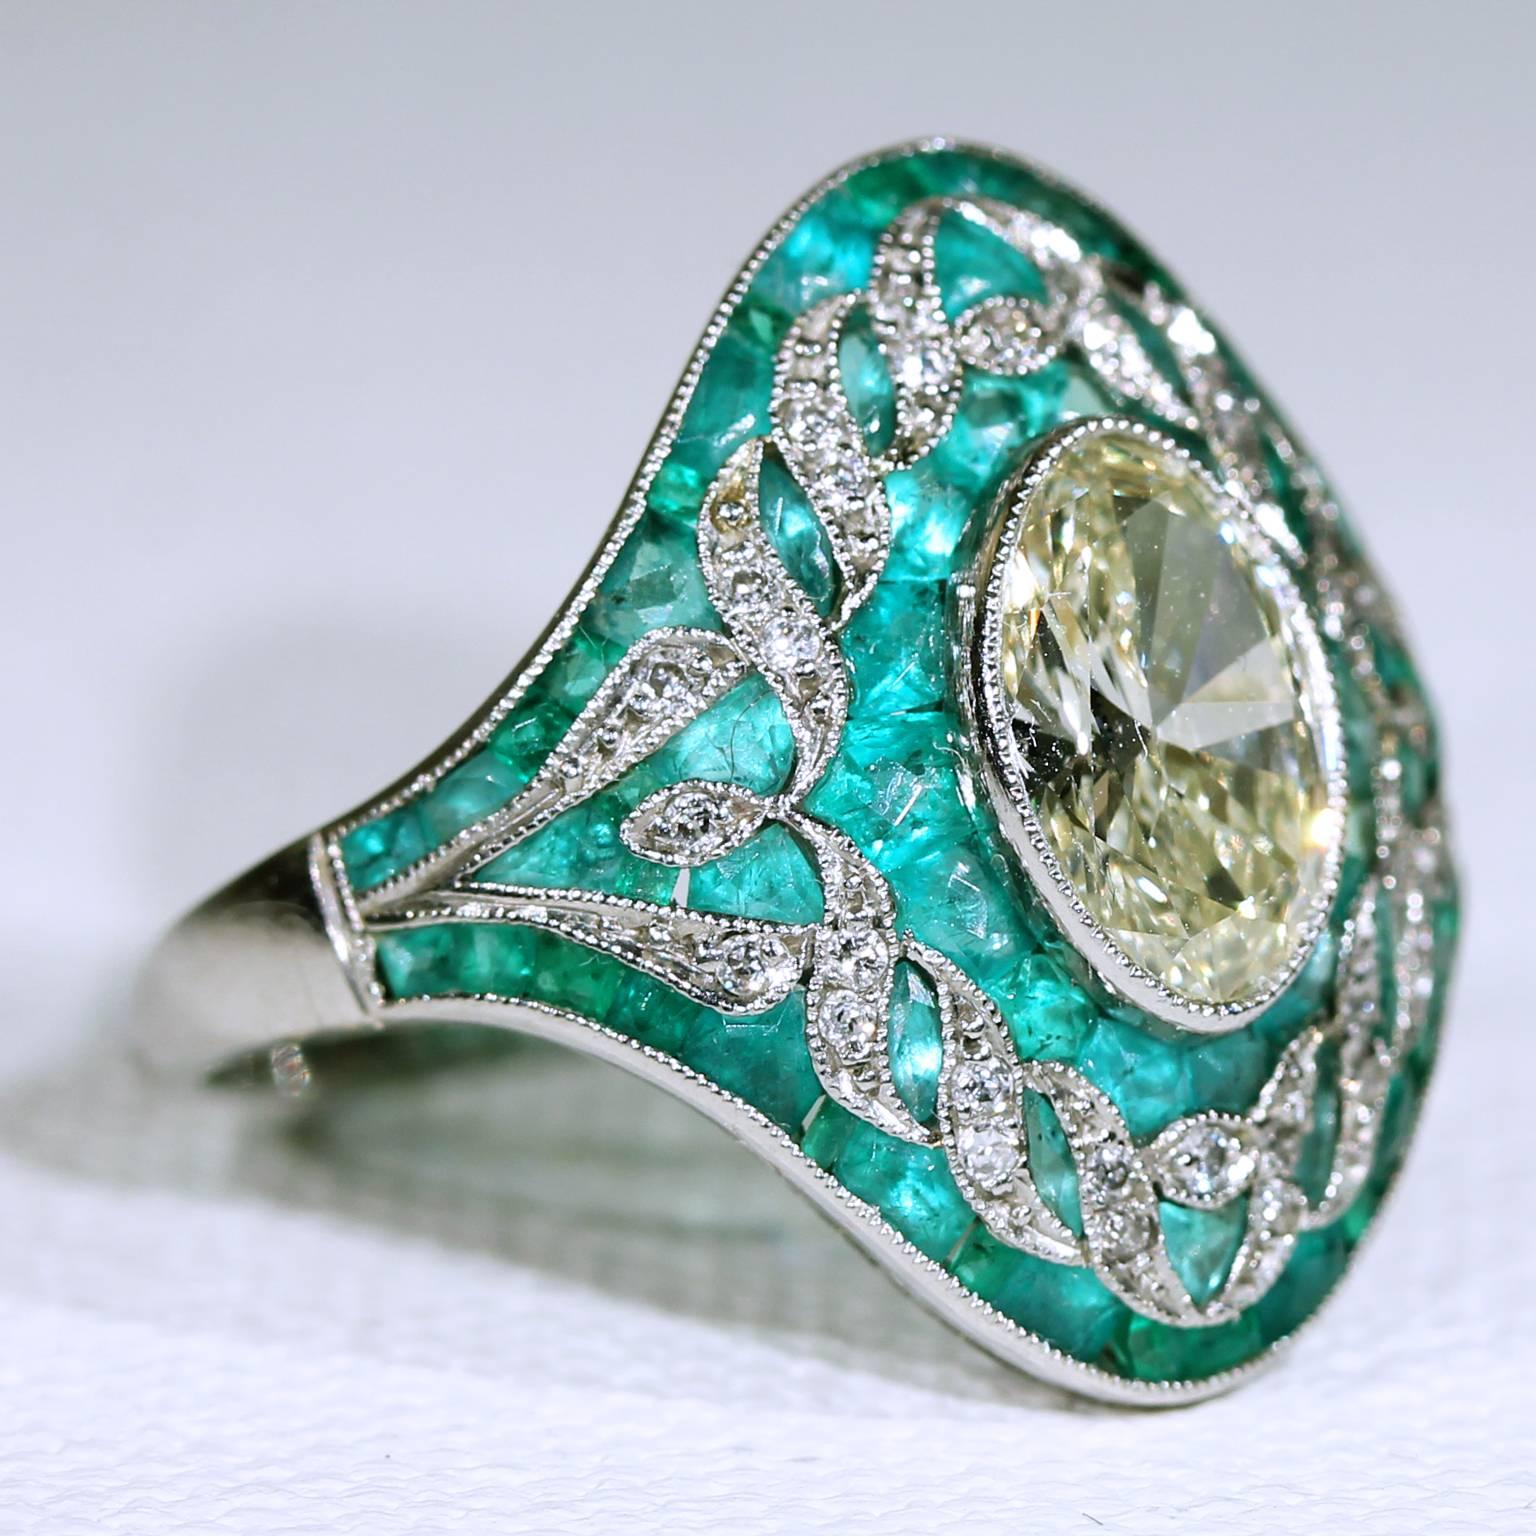 Every once in a great while, I come across a piece of jewelry that shows such a high level of skill in the crafting that it crosses the line between art and jewelry. This ring is just such a piece, the emeralds are all custom cut and made to fit